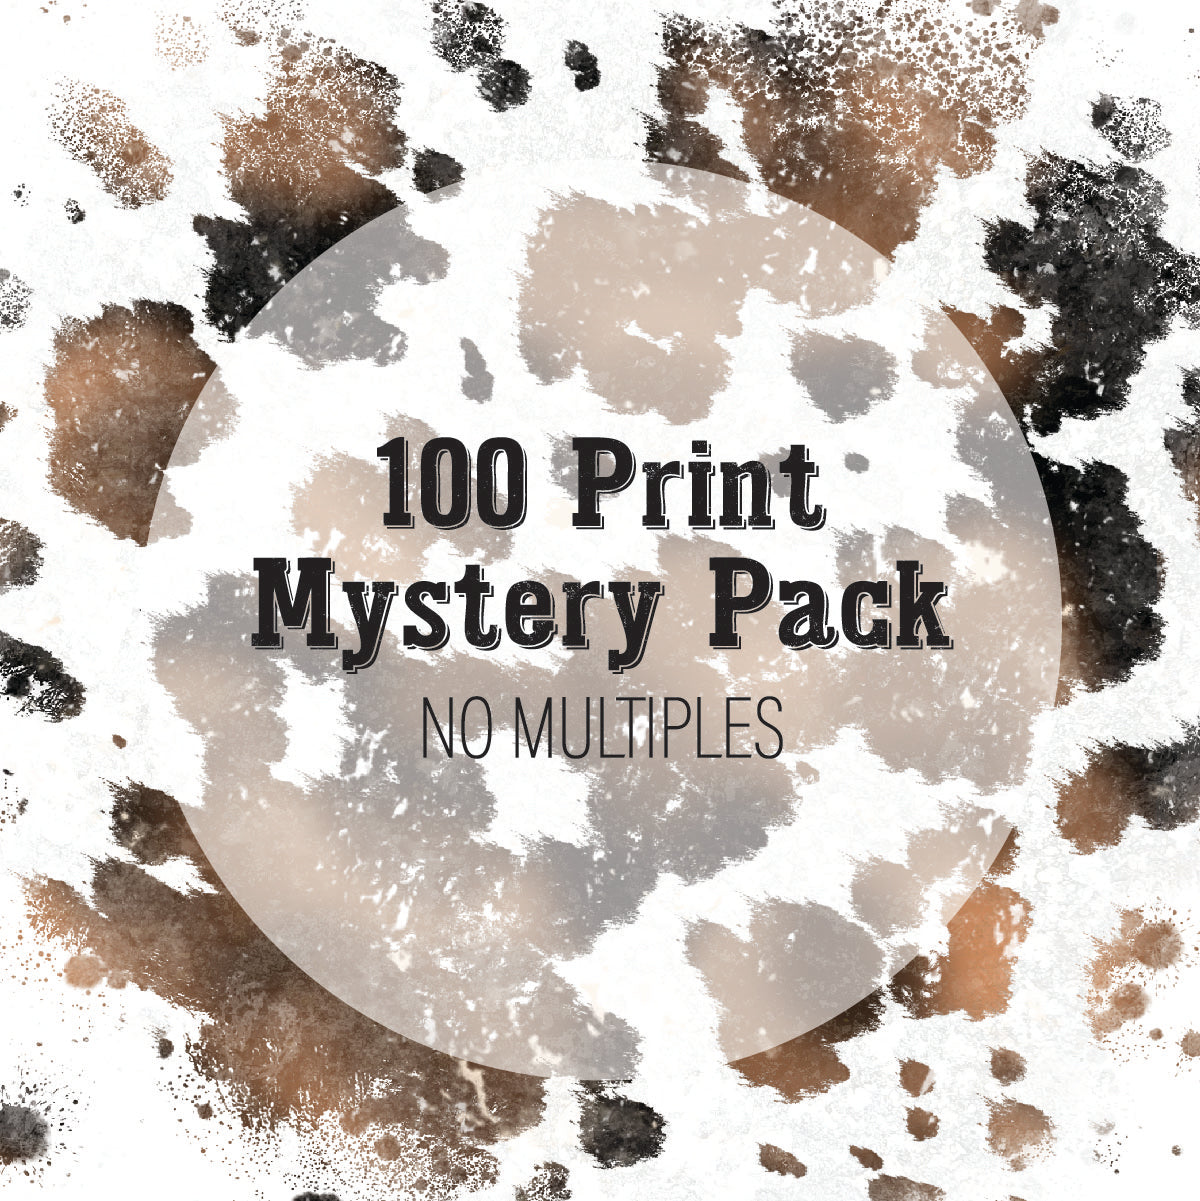 100 Prints Mystery Pack - NO Multiples